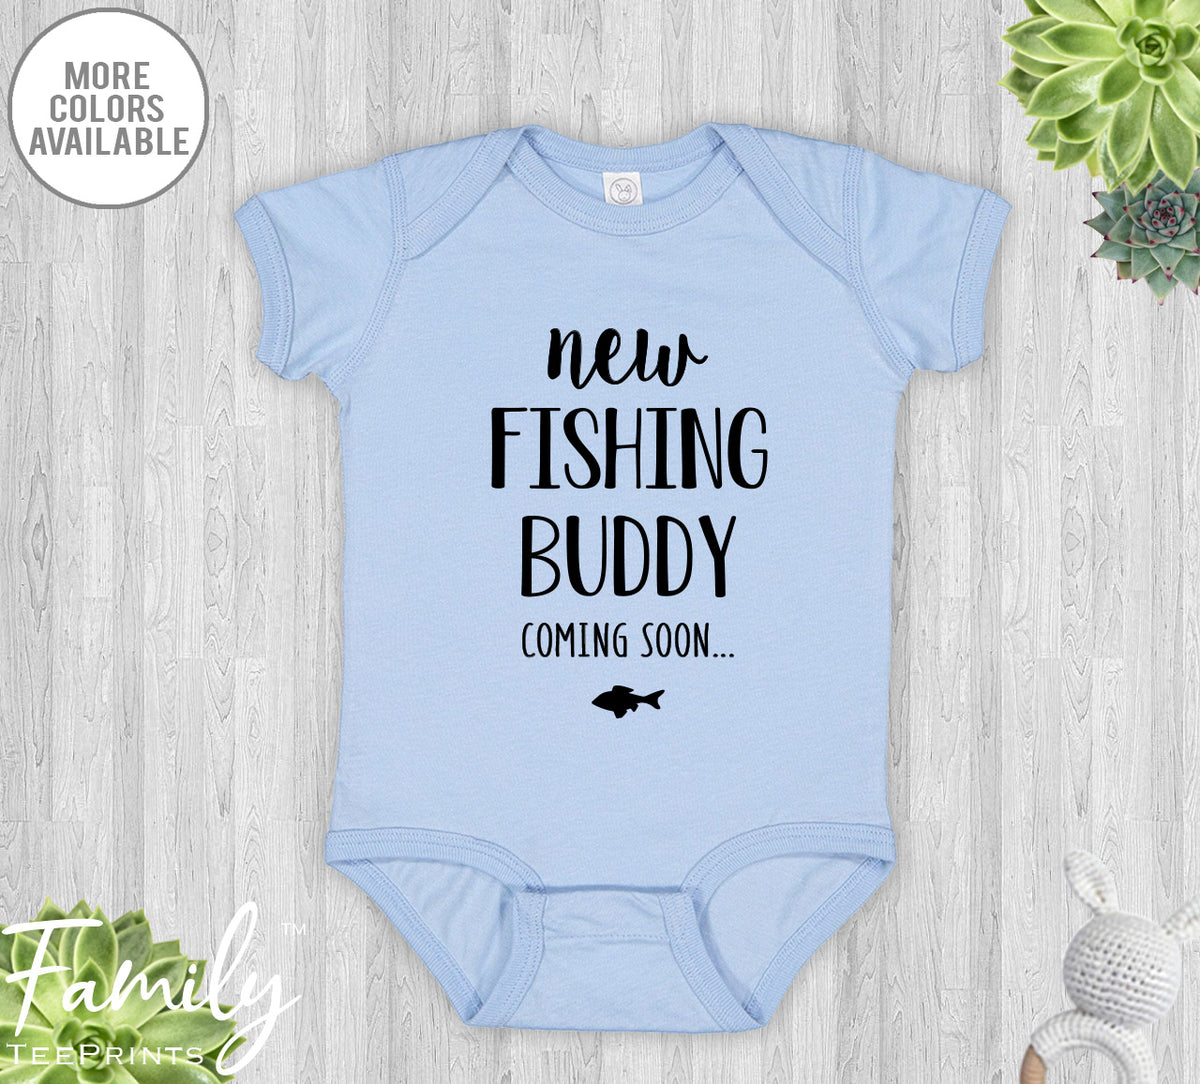 New Fishing Buddy Coming Soon - Baby Onesie - Pregnancy Reveal Gift - Baby Announcement - familyteeprints